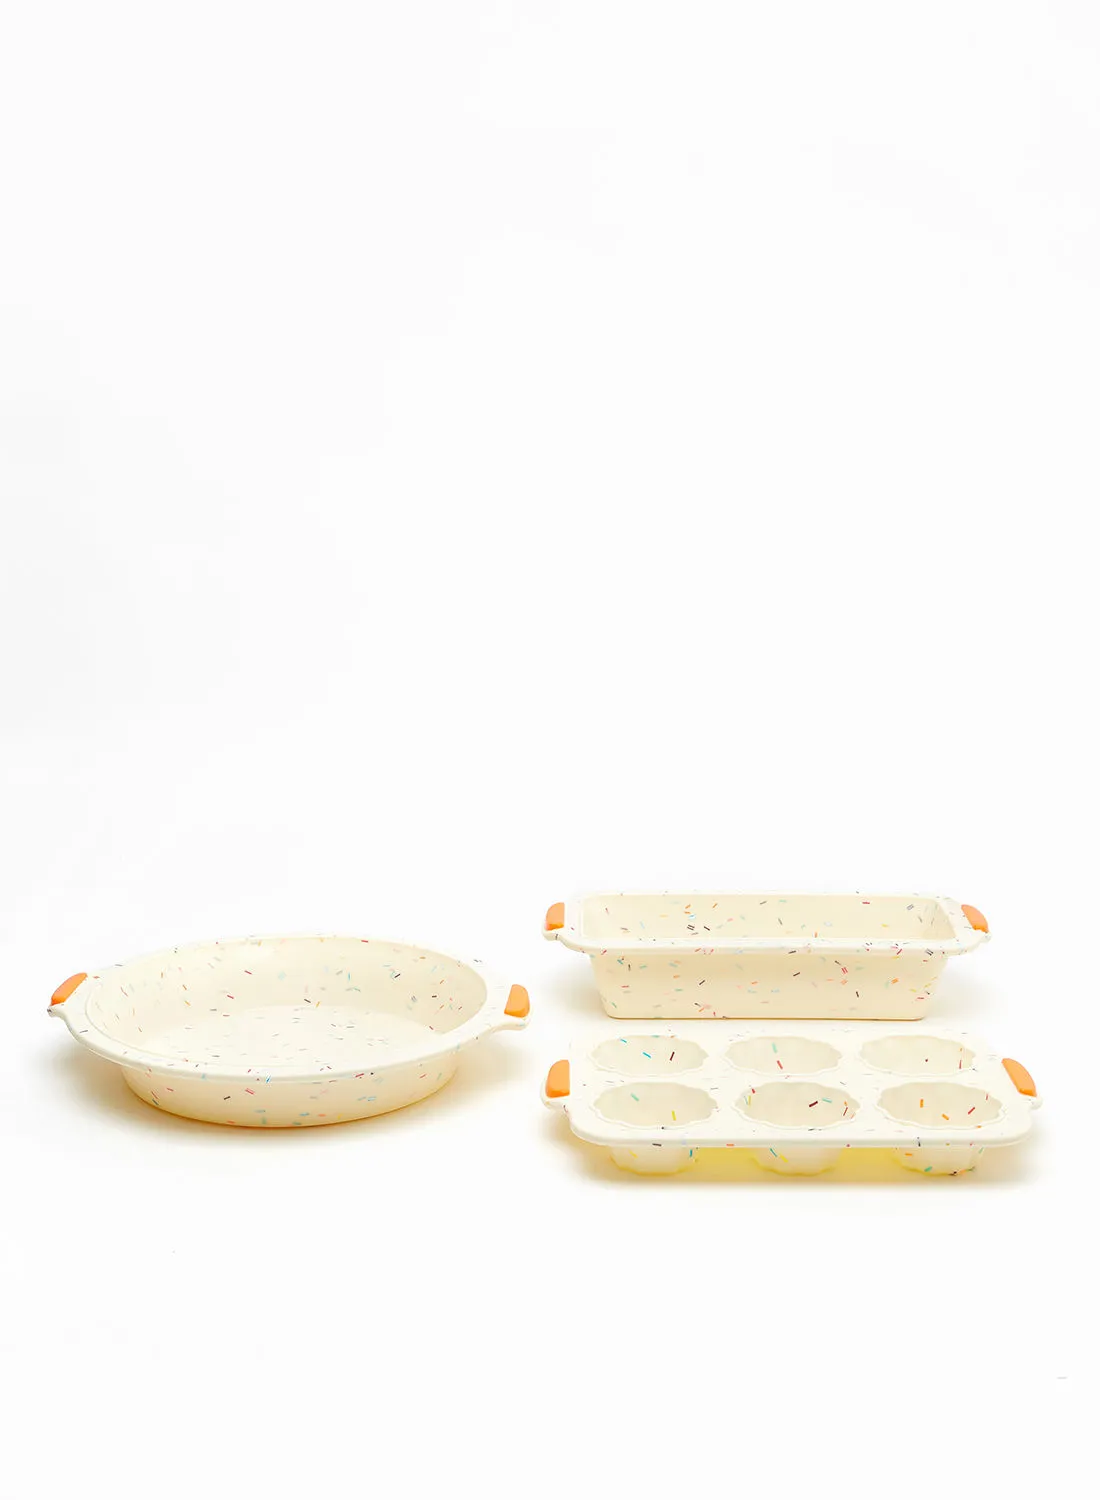 noon east 3 Piece Oven Pan Set - Made Of Silicone - Baking Pan - Oven Trays - Cake Tray - Oven Pan - Cream/Sprinkles